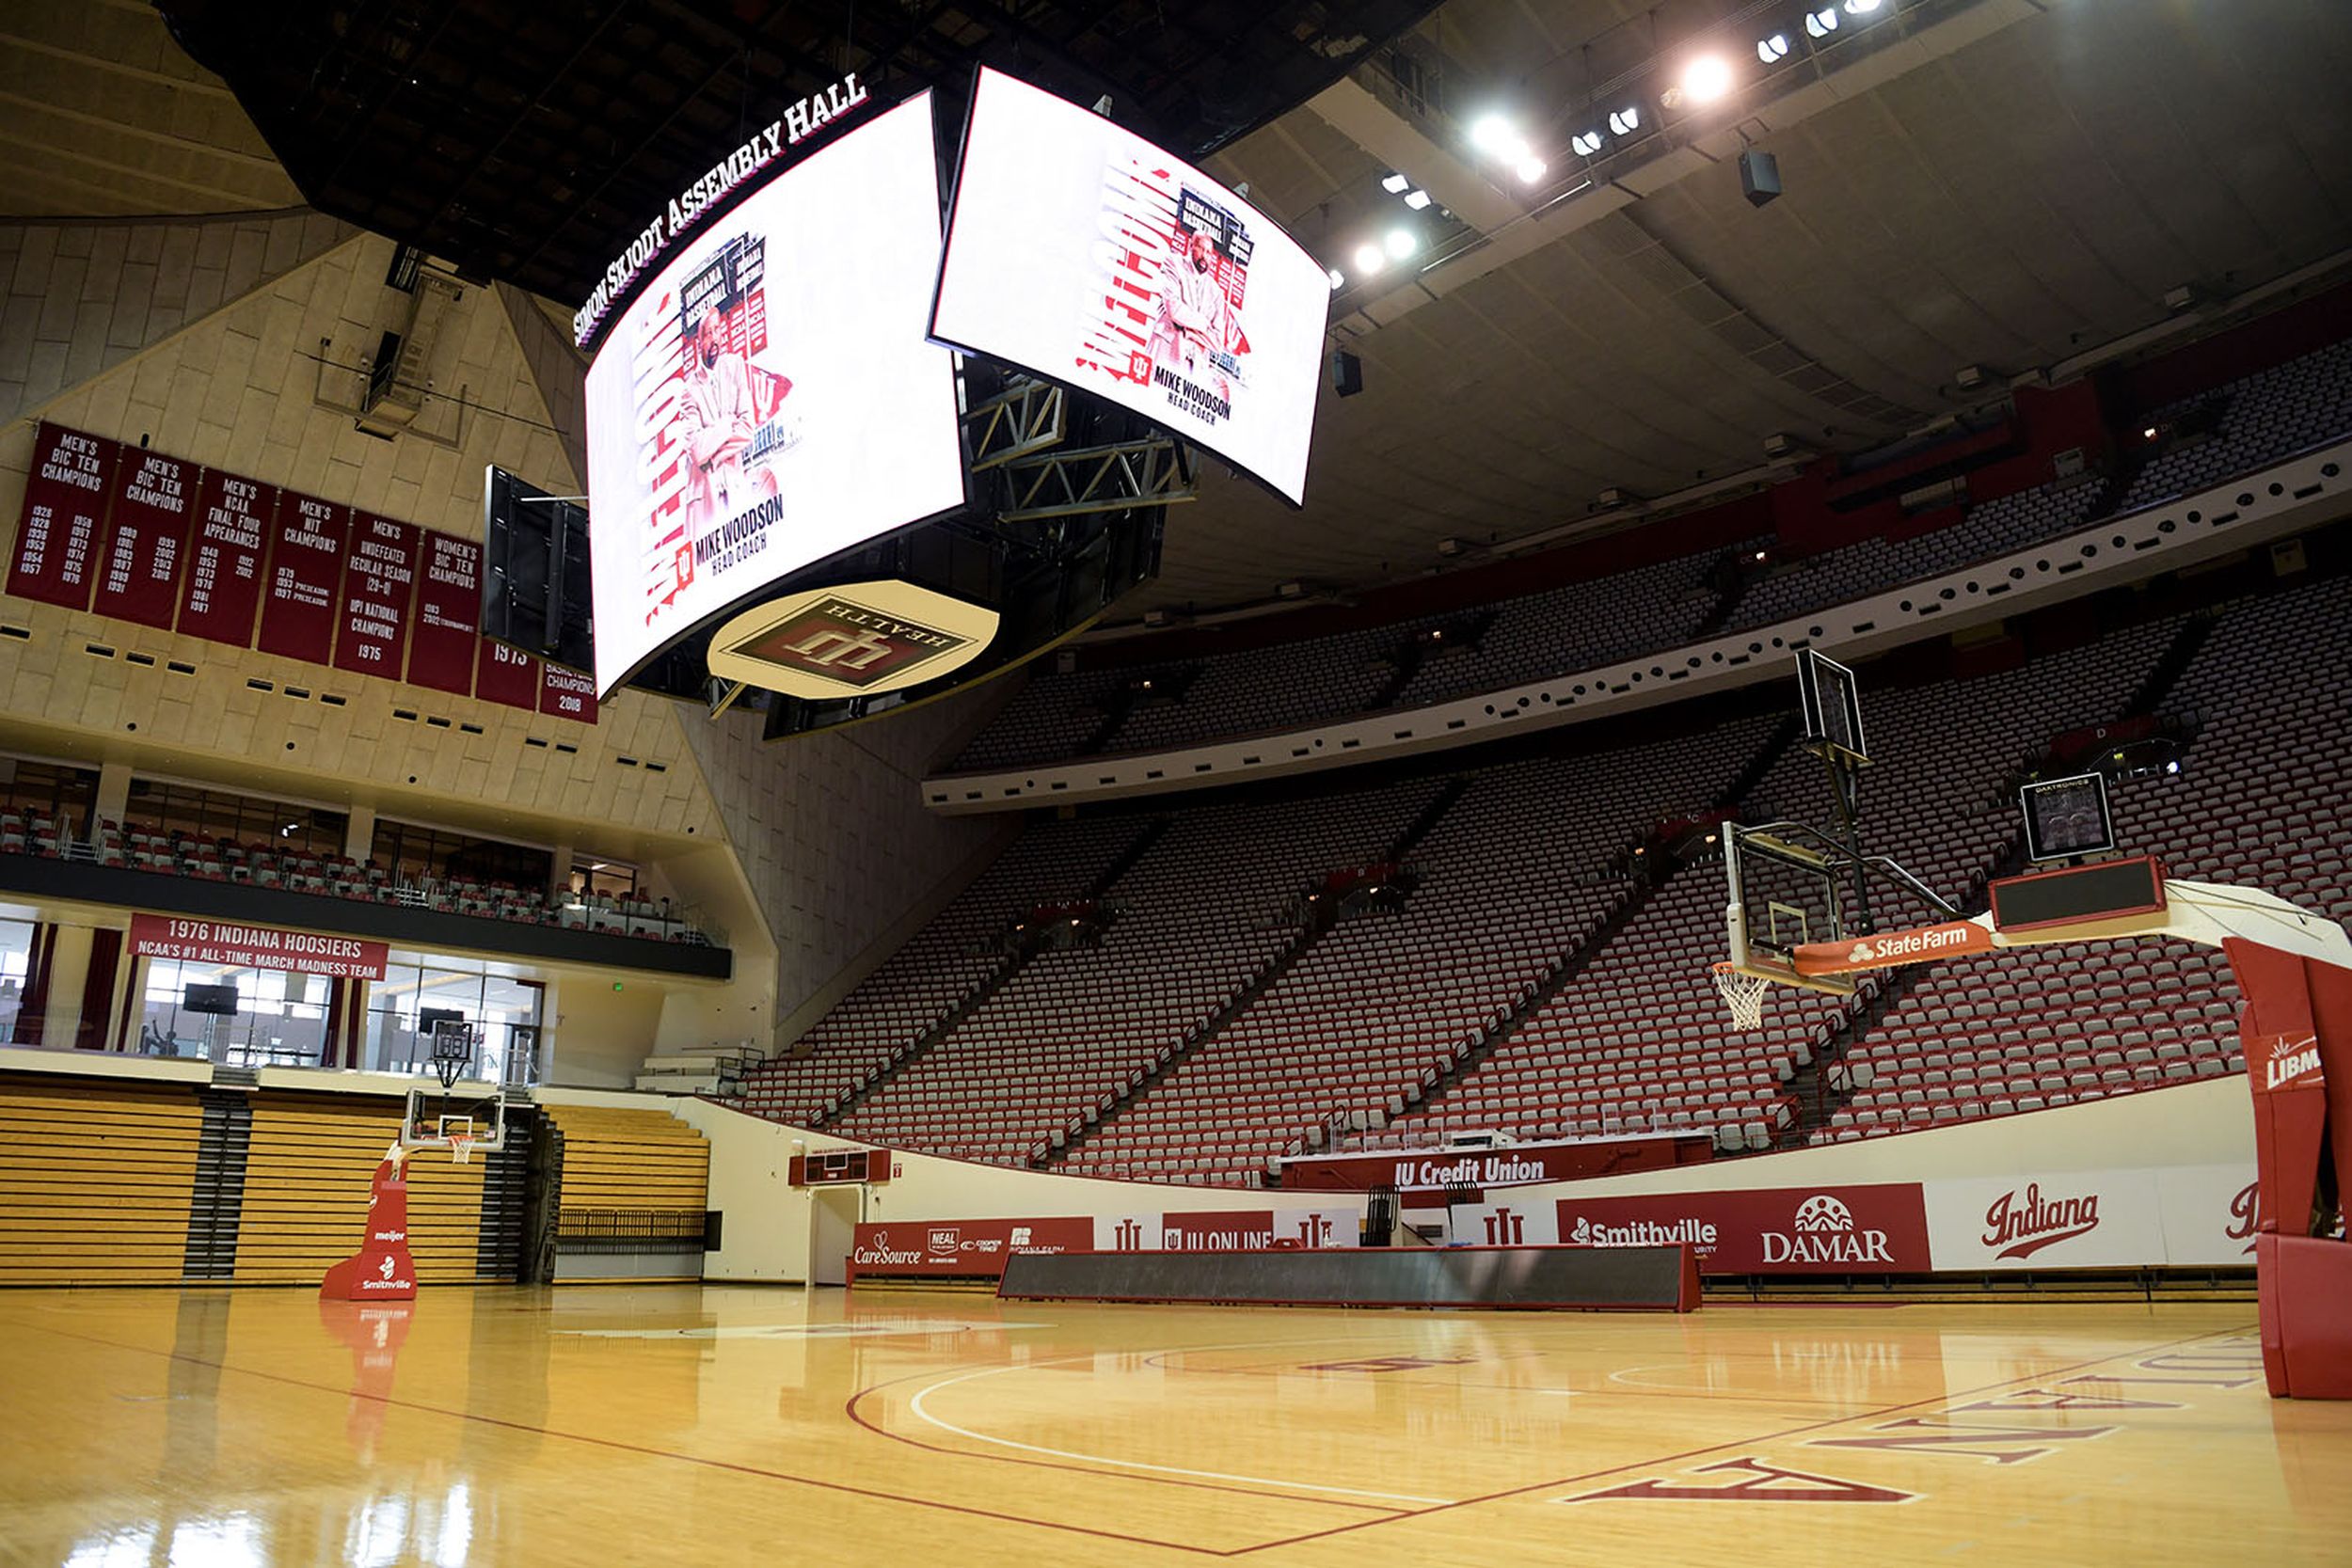 NCAA tournament 2021 site: What to know about Indiana's Assembly Hall